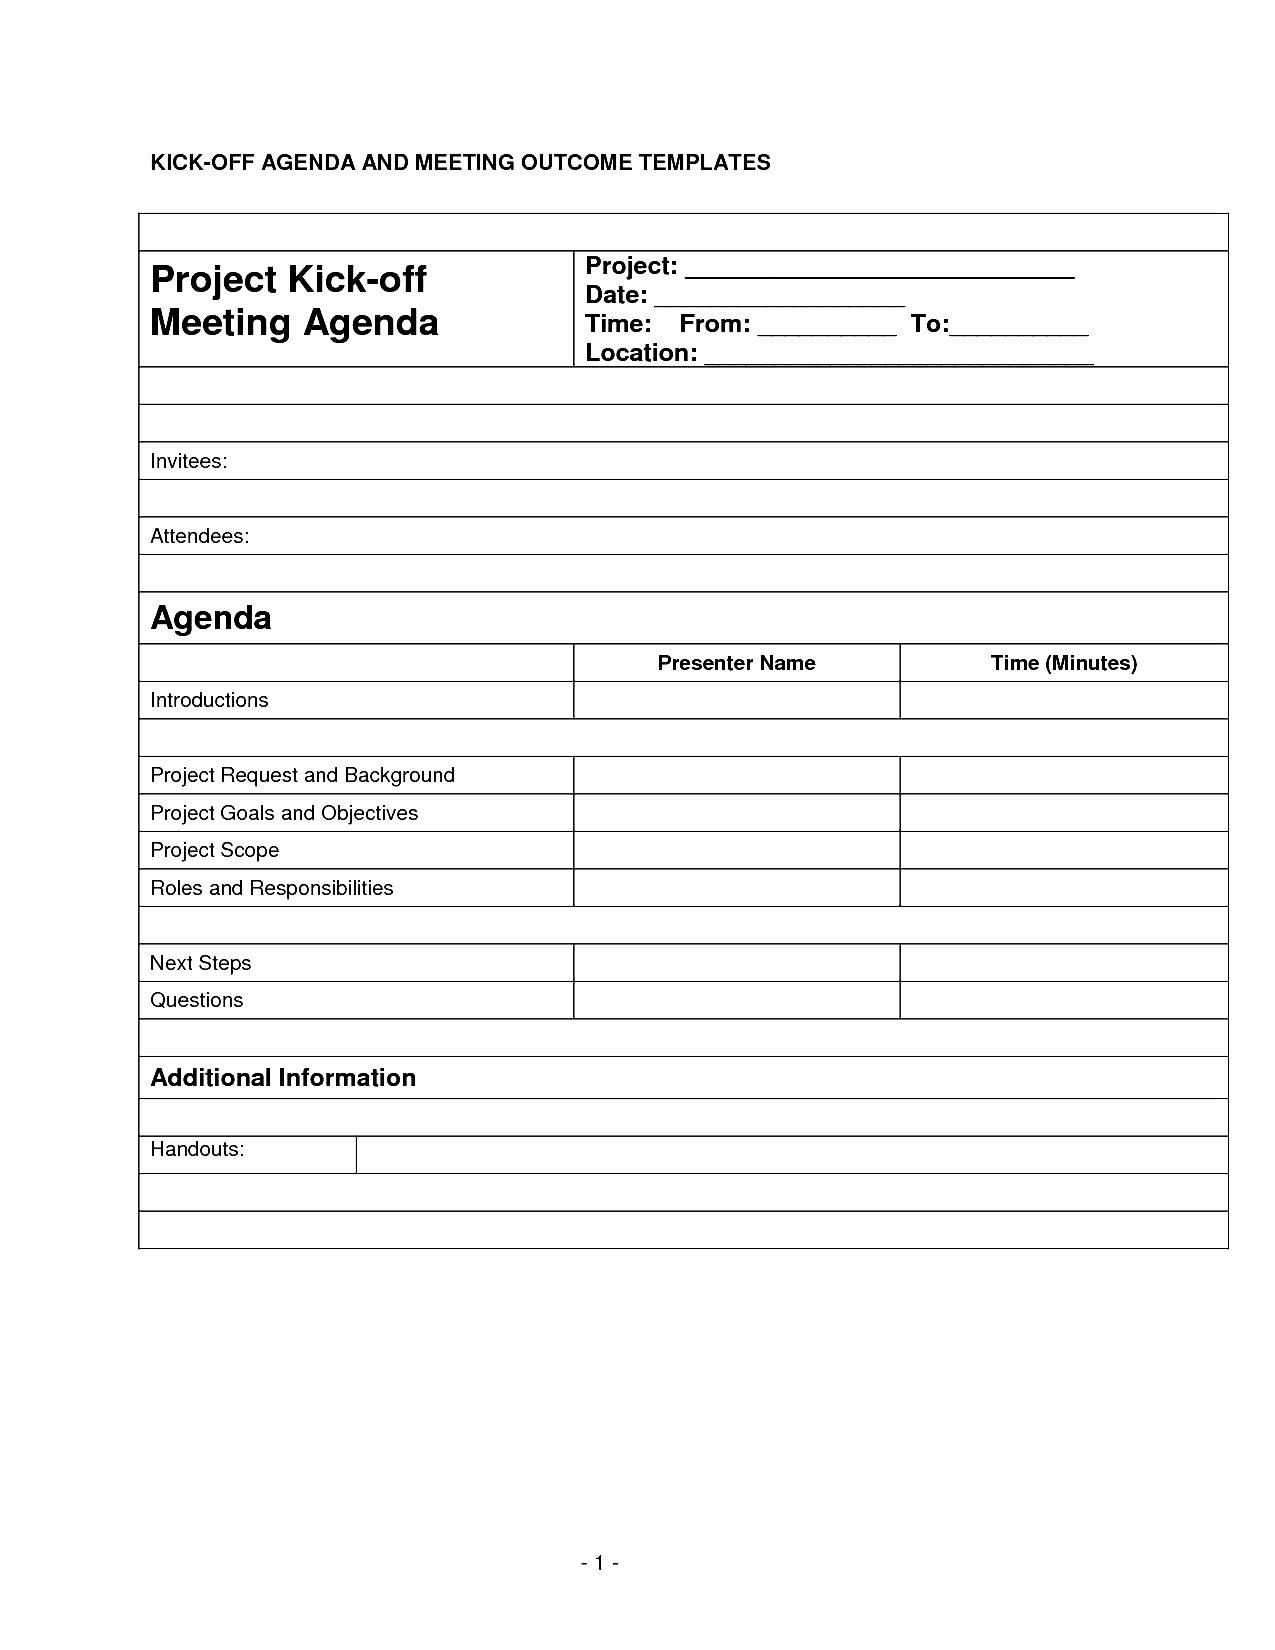 Kickoff Meeting Agenda Template Luxury Best Kick F Agenda and Meeting Out E Template Example